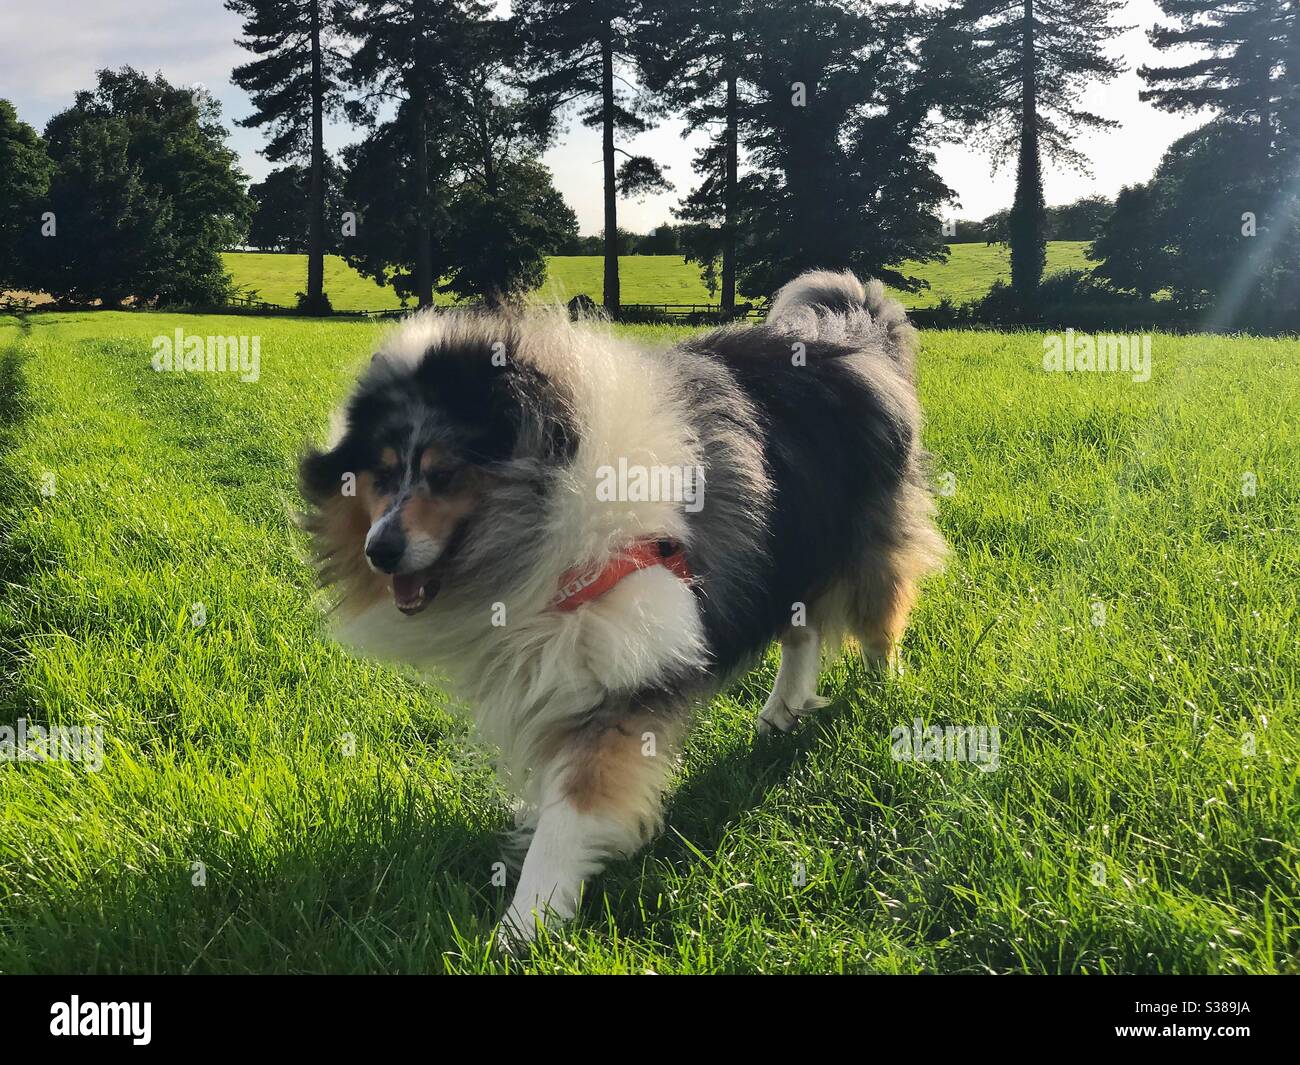 Rough Collie running through a field with a backdrop of tall trees. Stock Photo